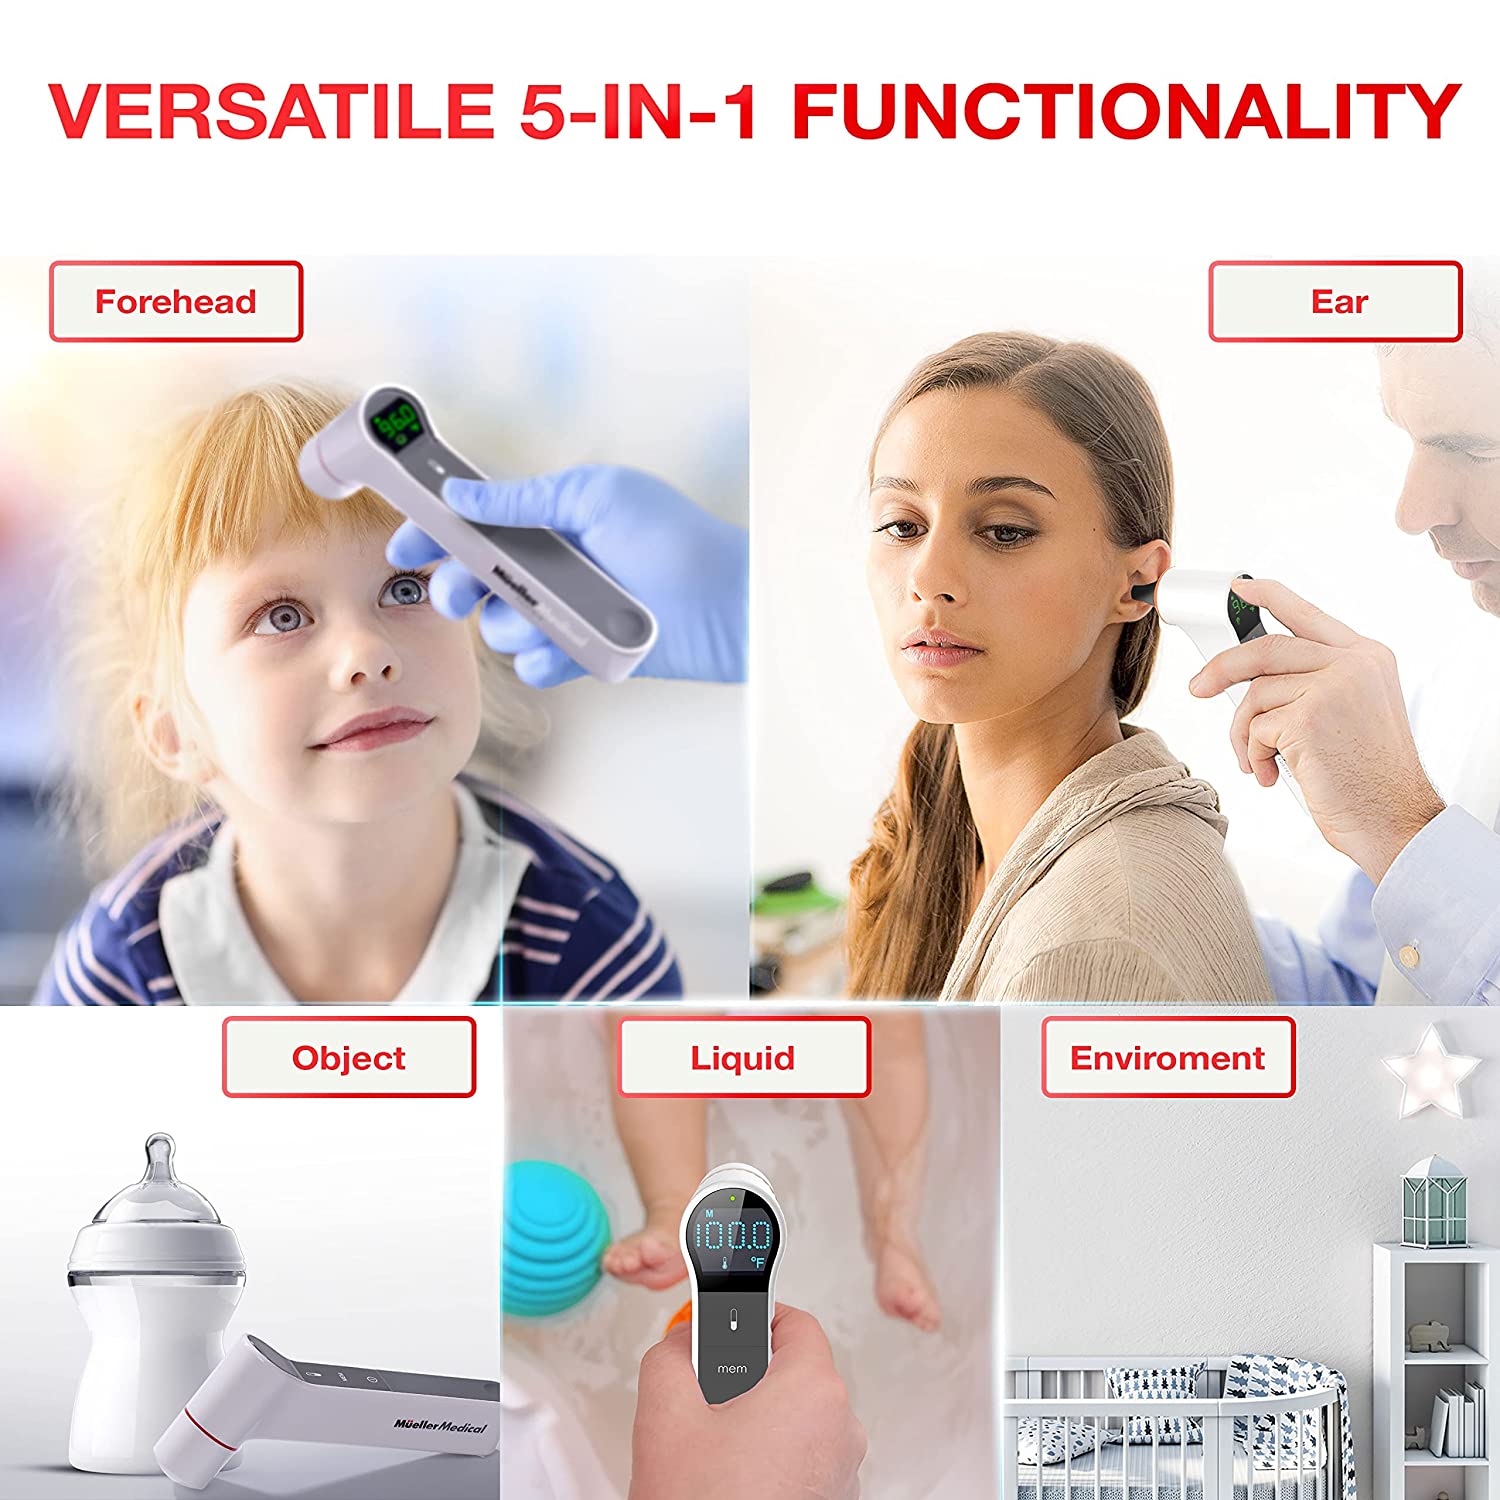 muellerhome_Infrared-Ear-Forehead-Thermometer-Gray-2